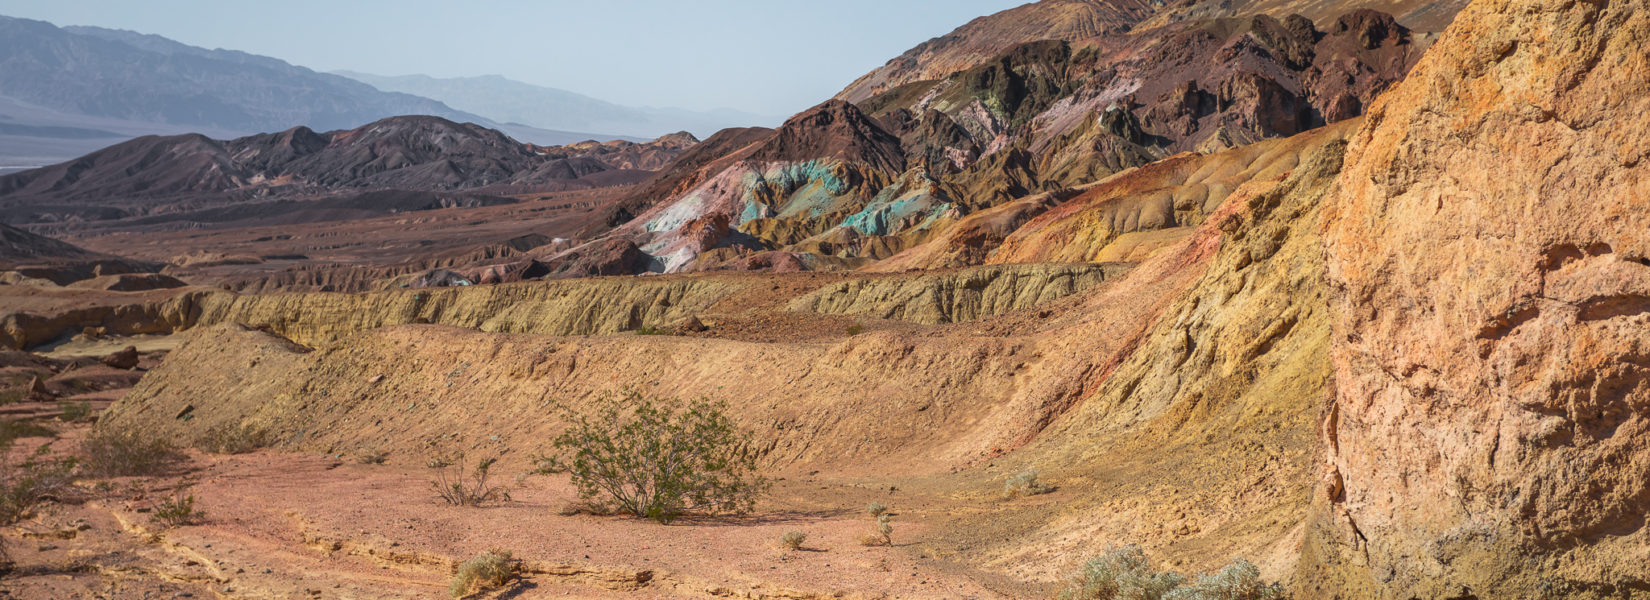 Cotton Candy Mountains: Artists Drive in Death Valley National Park